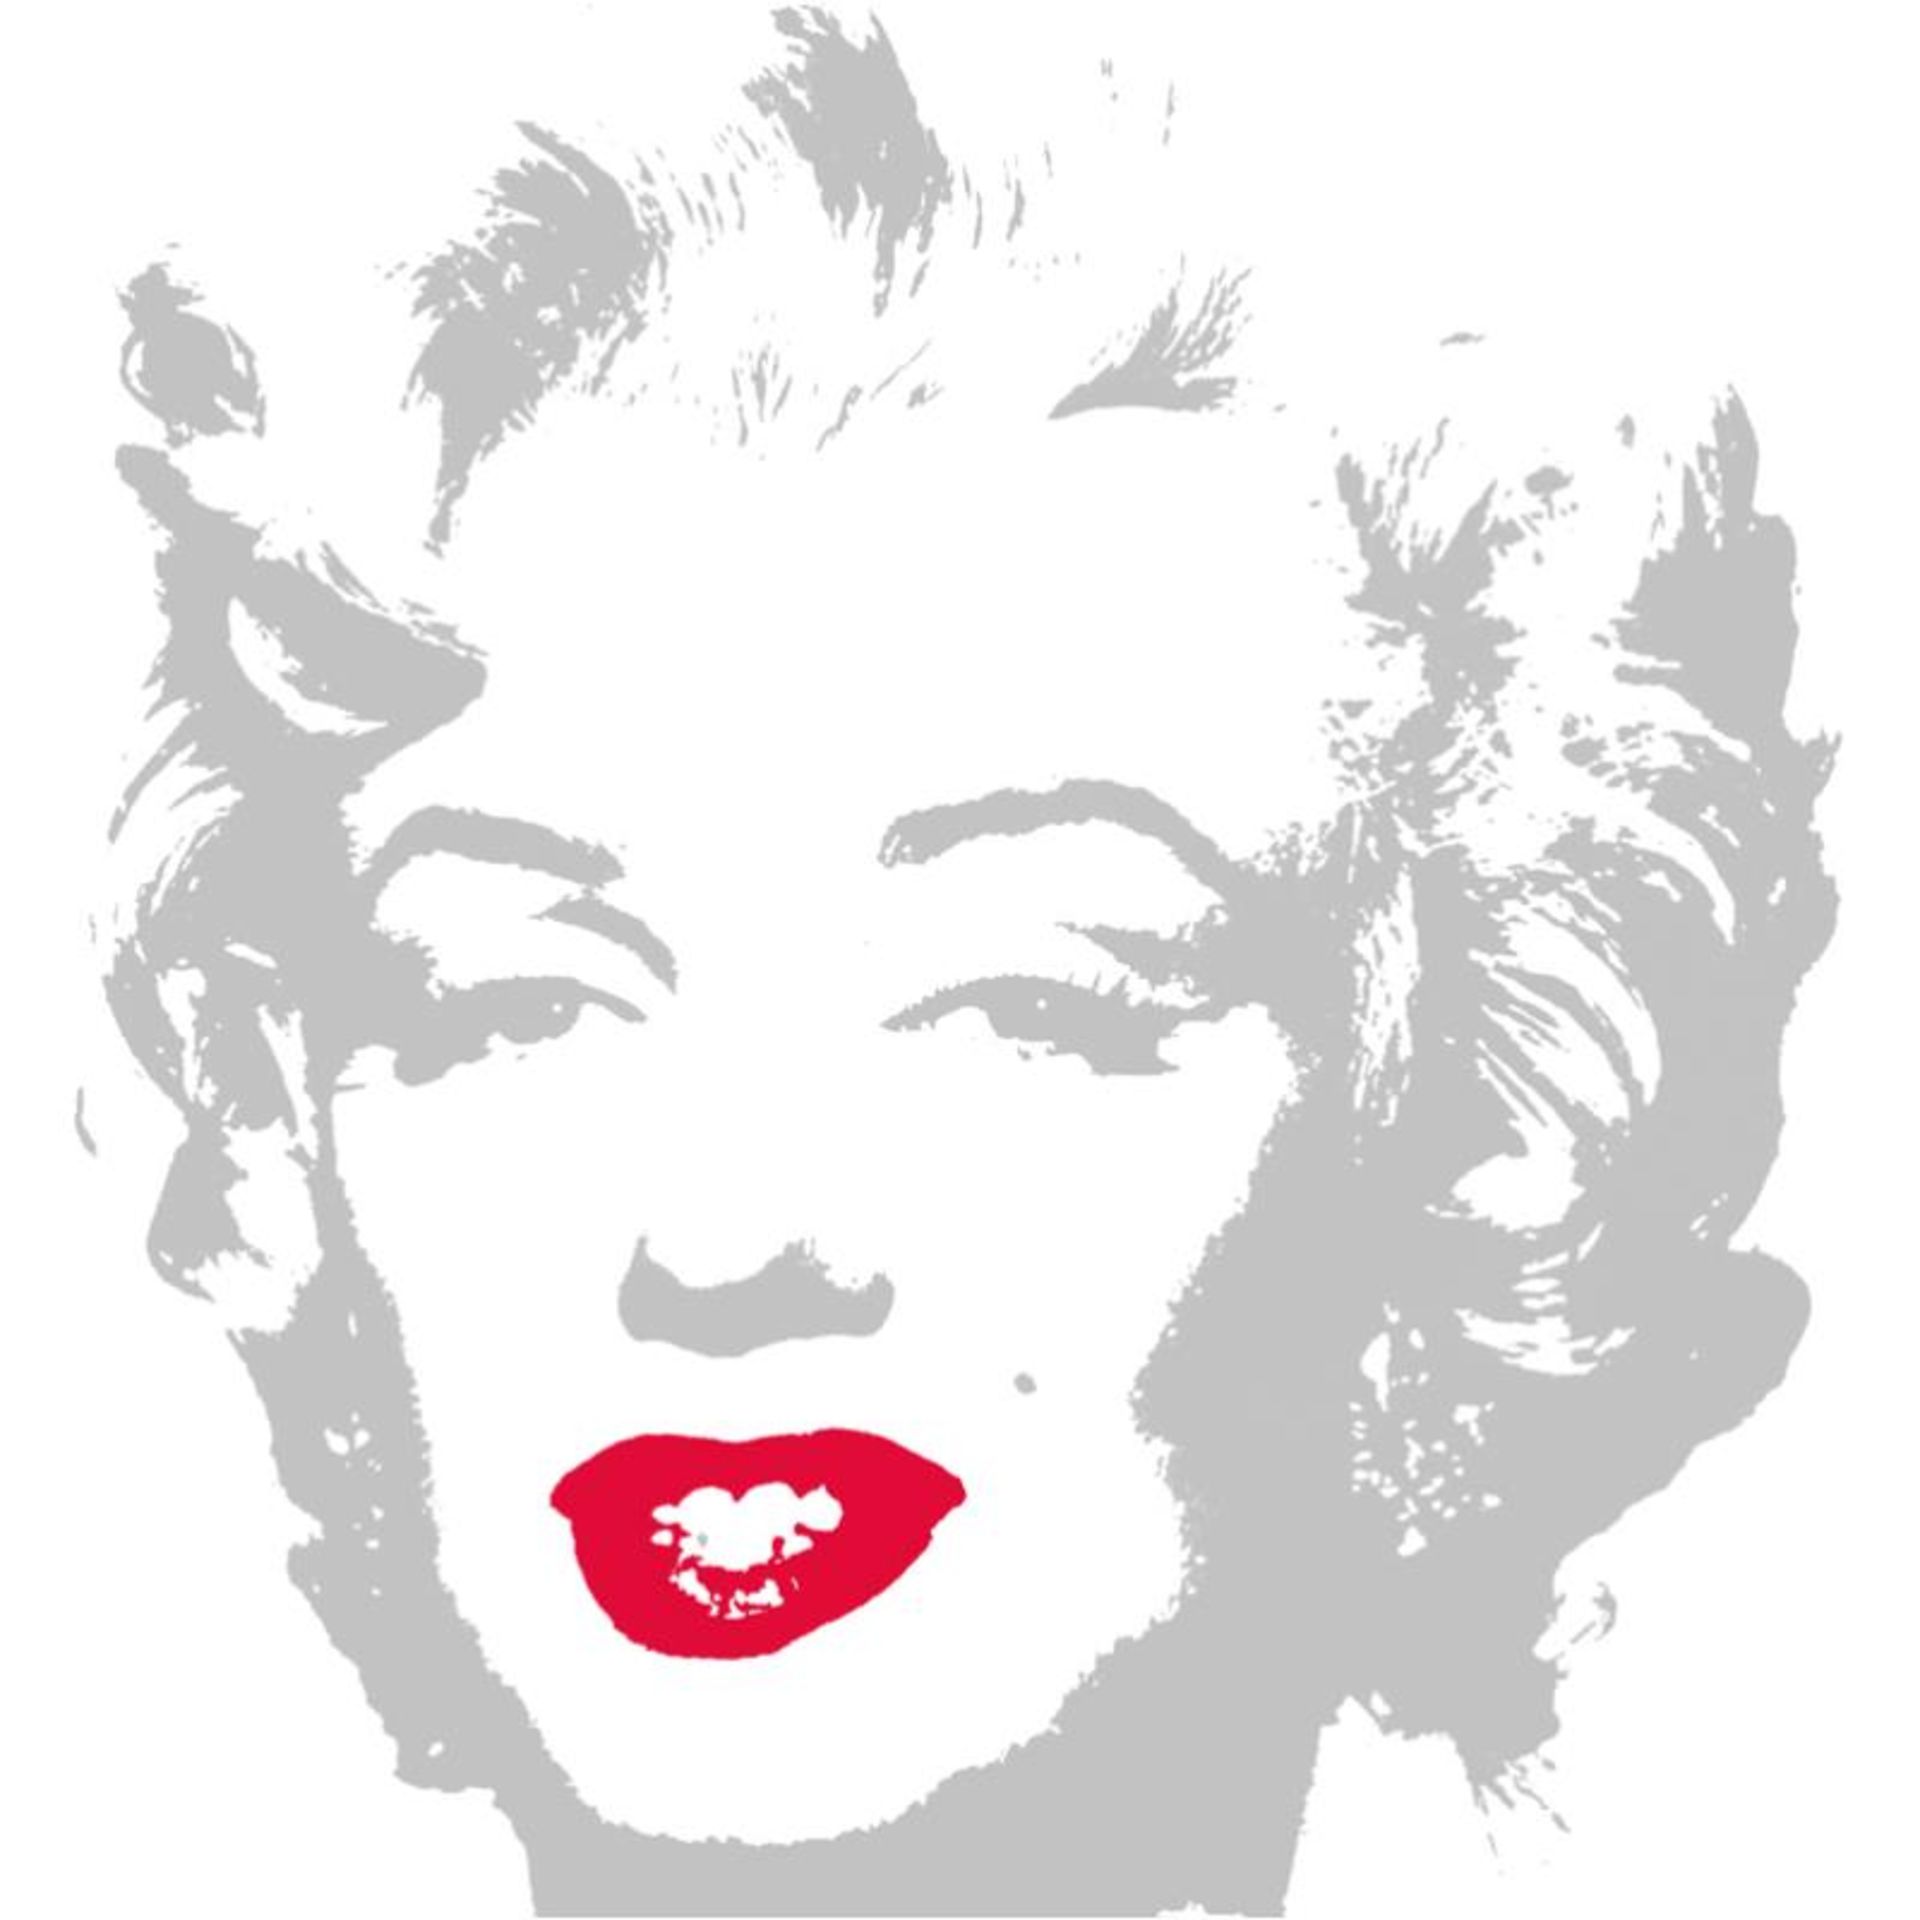 Andy Warhol "Golden Marilyn 11.35" Limited Edition Silk Screen Print from Sunday - Image 2 of 2